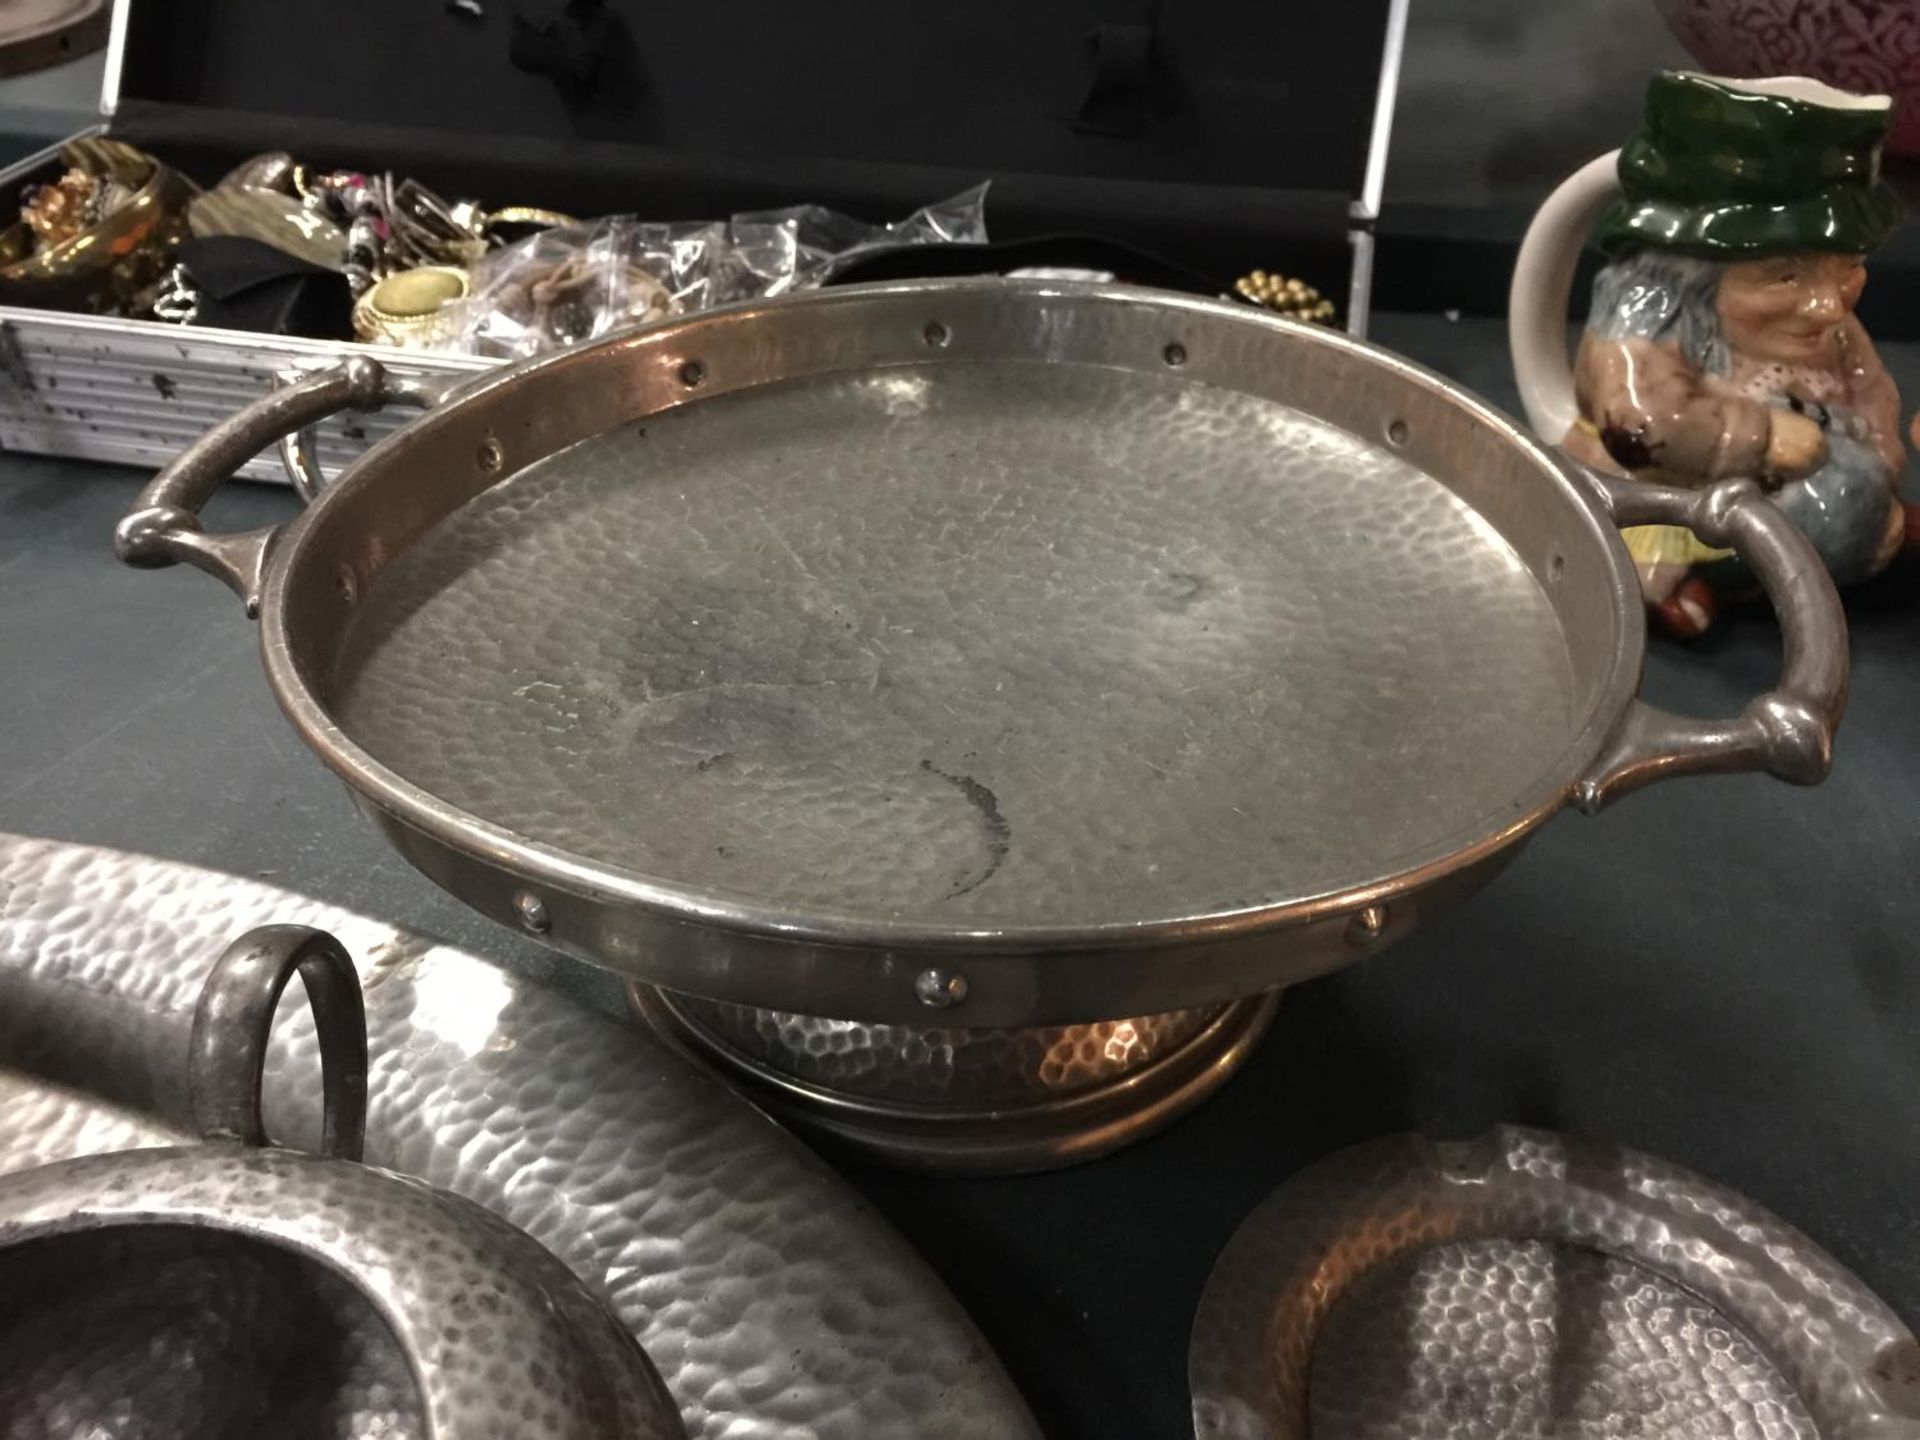 A PEWTER TEASET ON A TRAY, A PLATE ON A STAND AND THREE SMALLER PLATES - Image 5 of 6